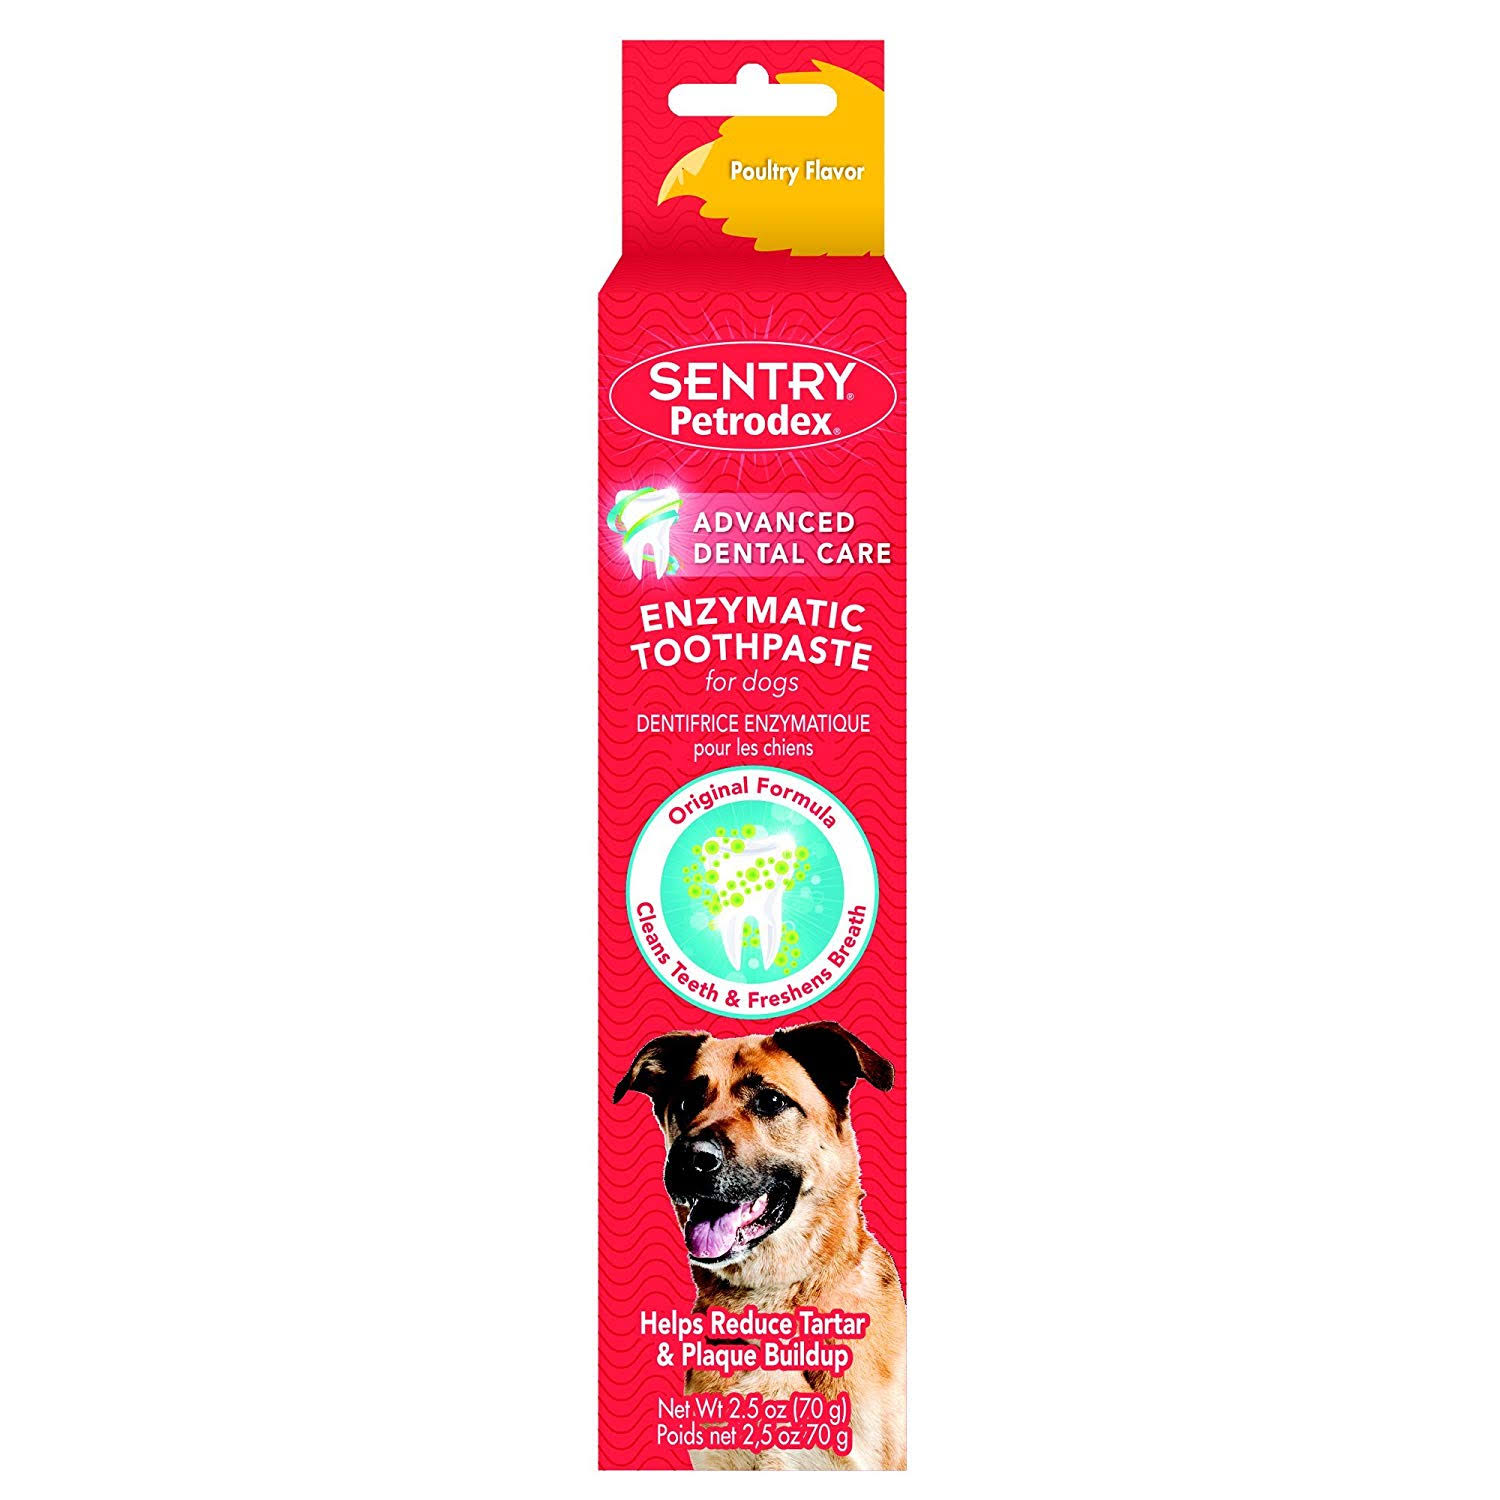 5 PACK of Petrodex Enzymatic Toothpaste for Dogs Poultry - 2.5 oz